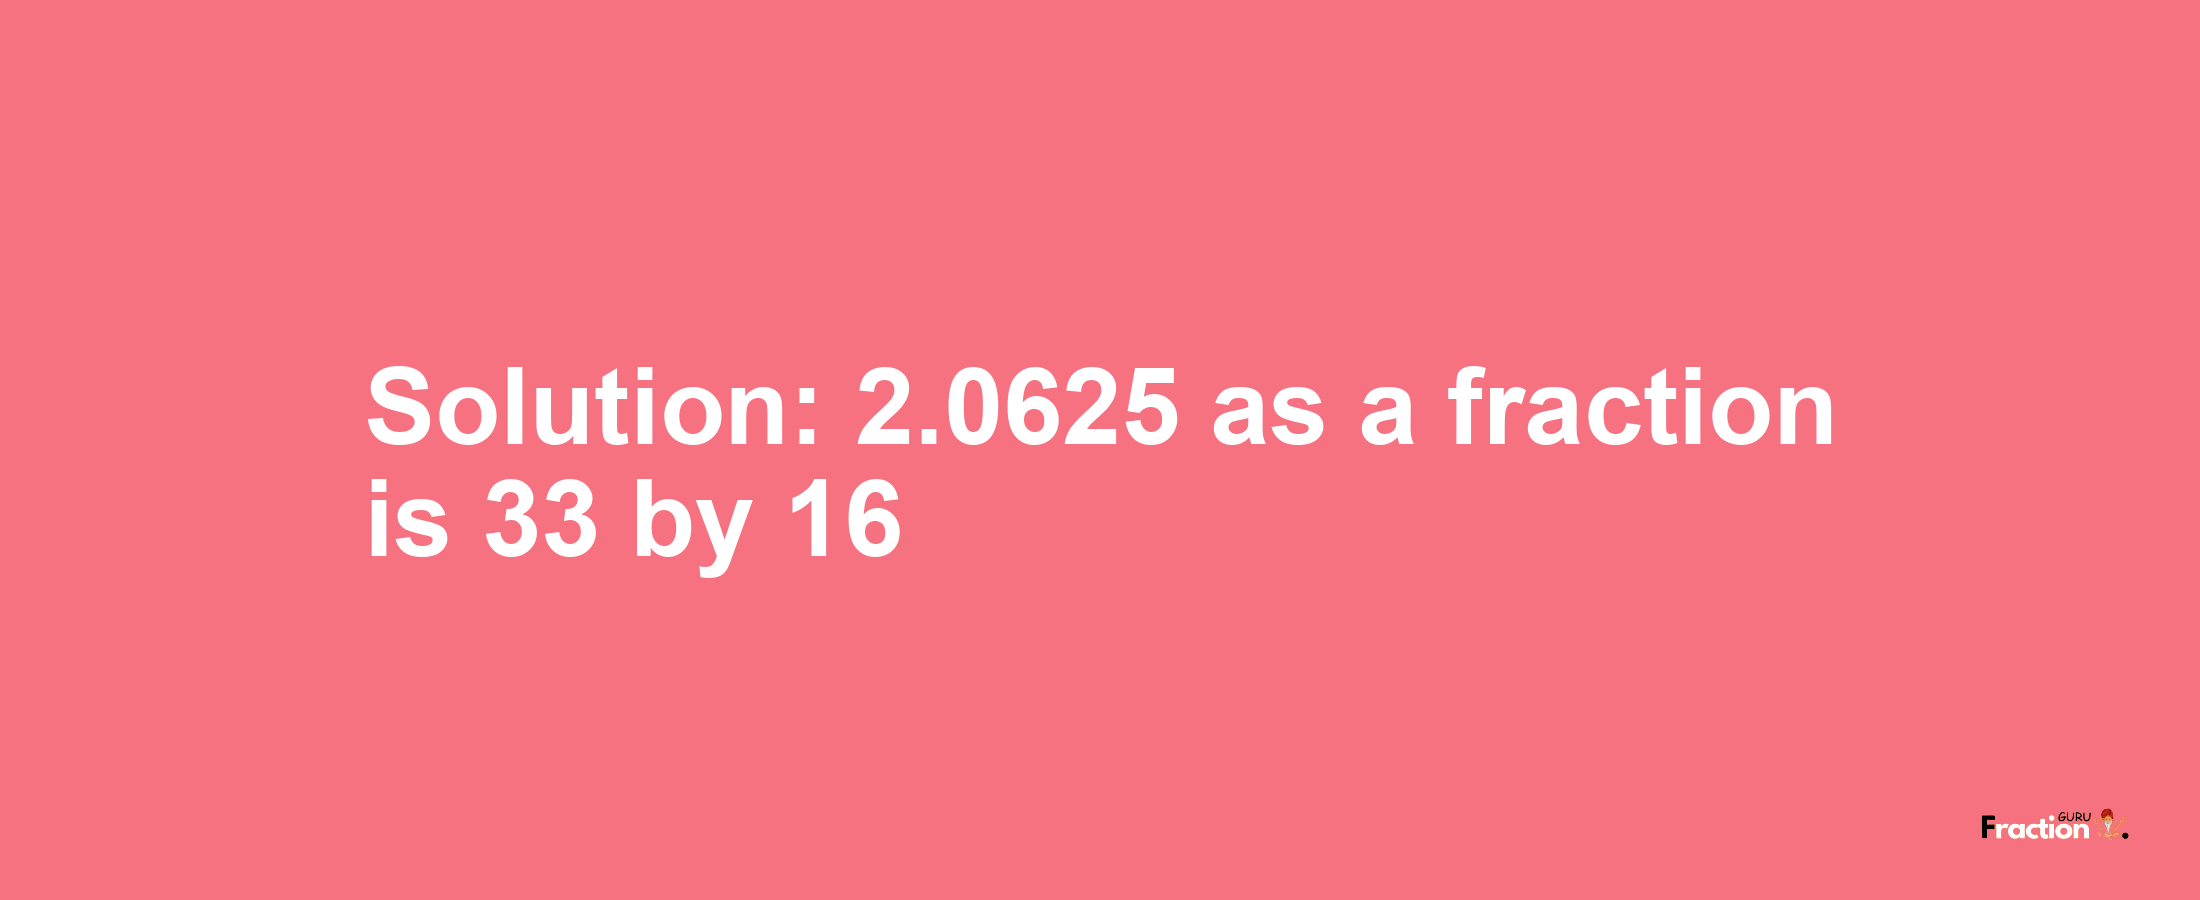 Solution:2.0625 as a fraction is 33/16